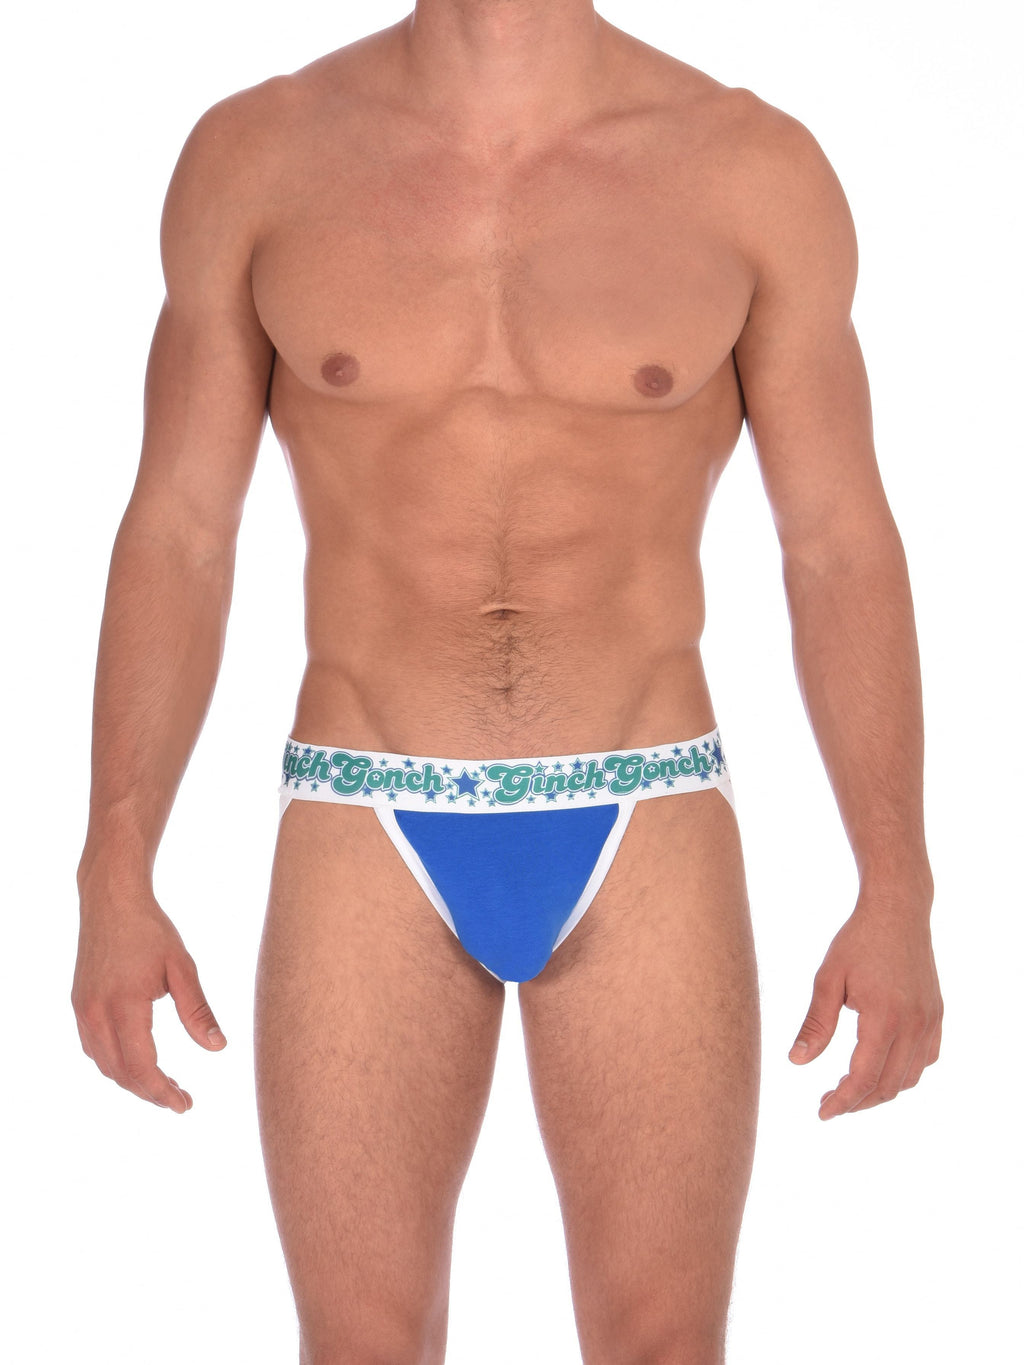 Ginch Gonch Blue Lagoon men's jock strap blue fabric with white trim and printed waistband front